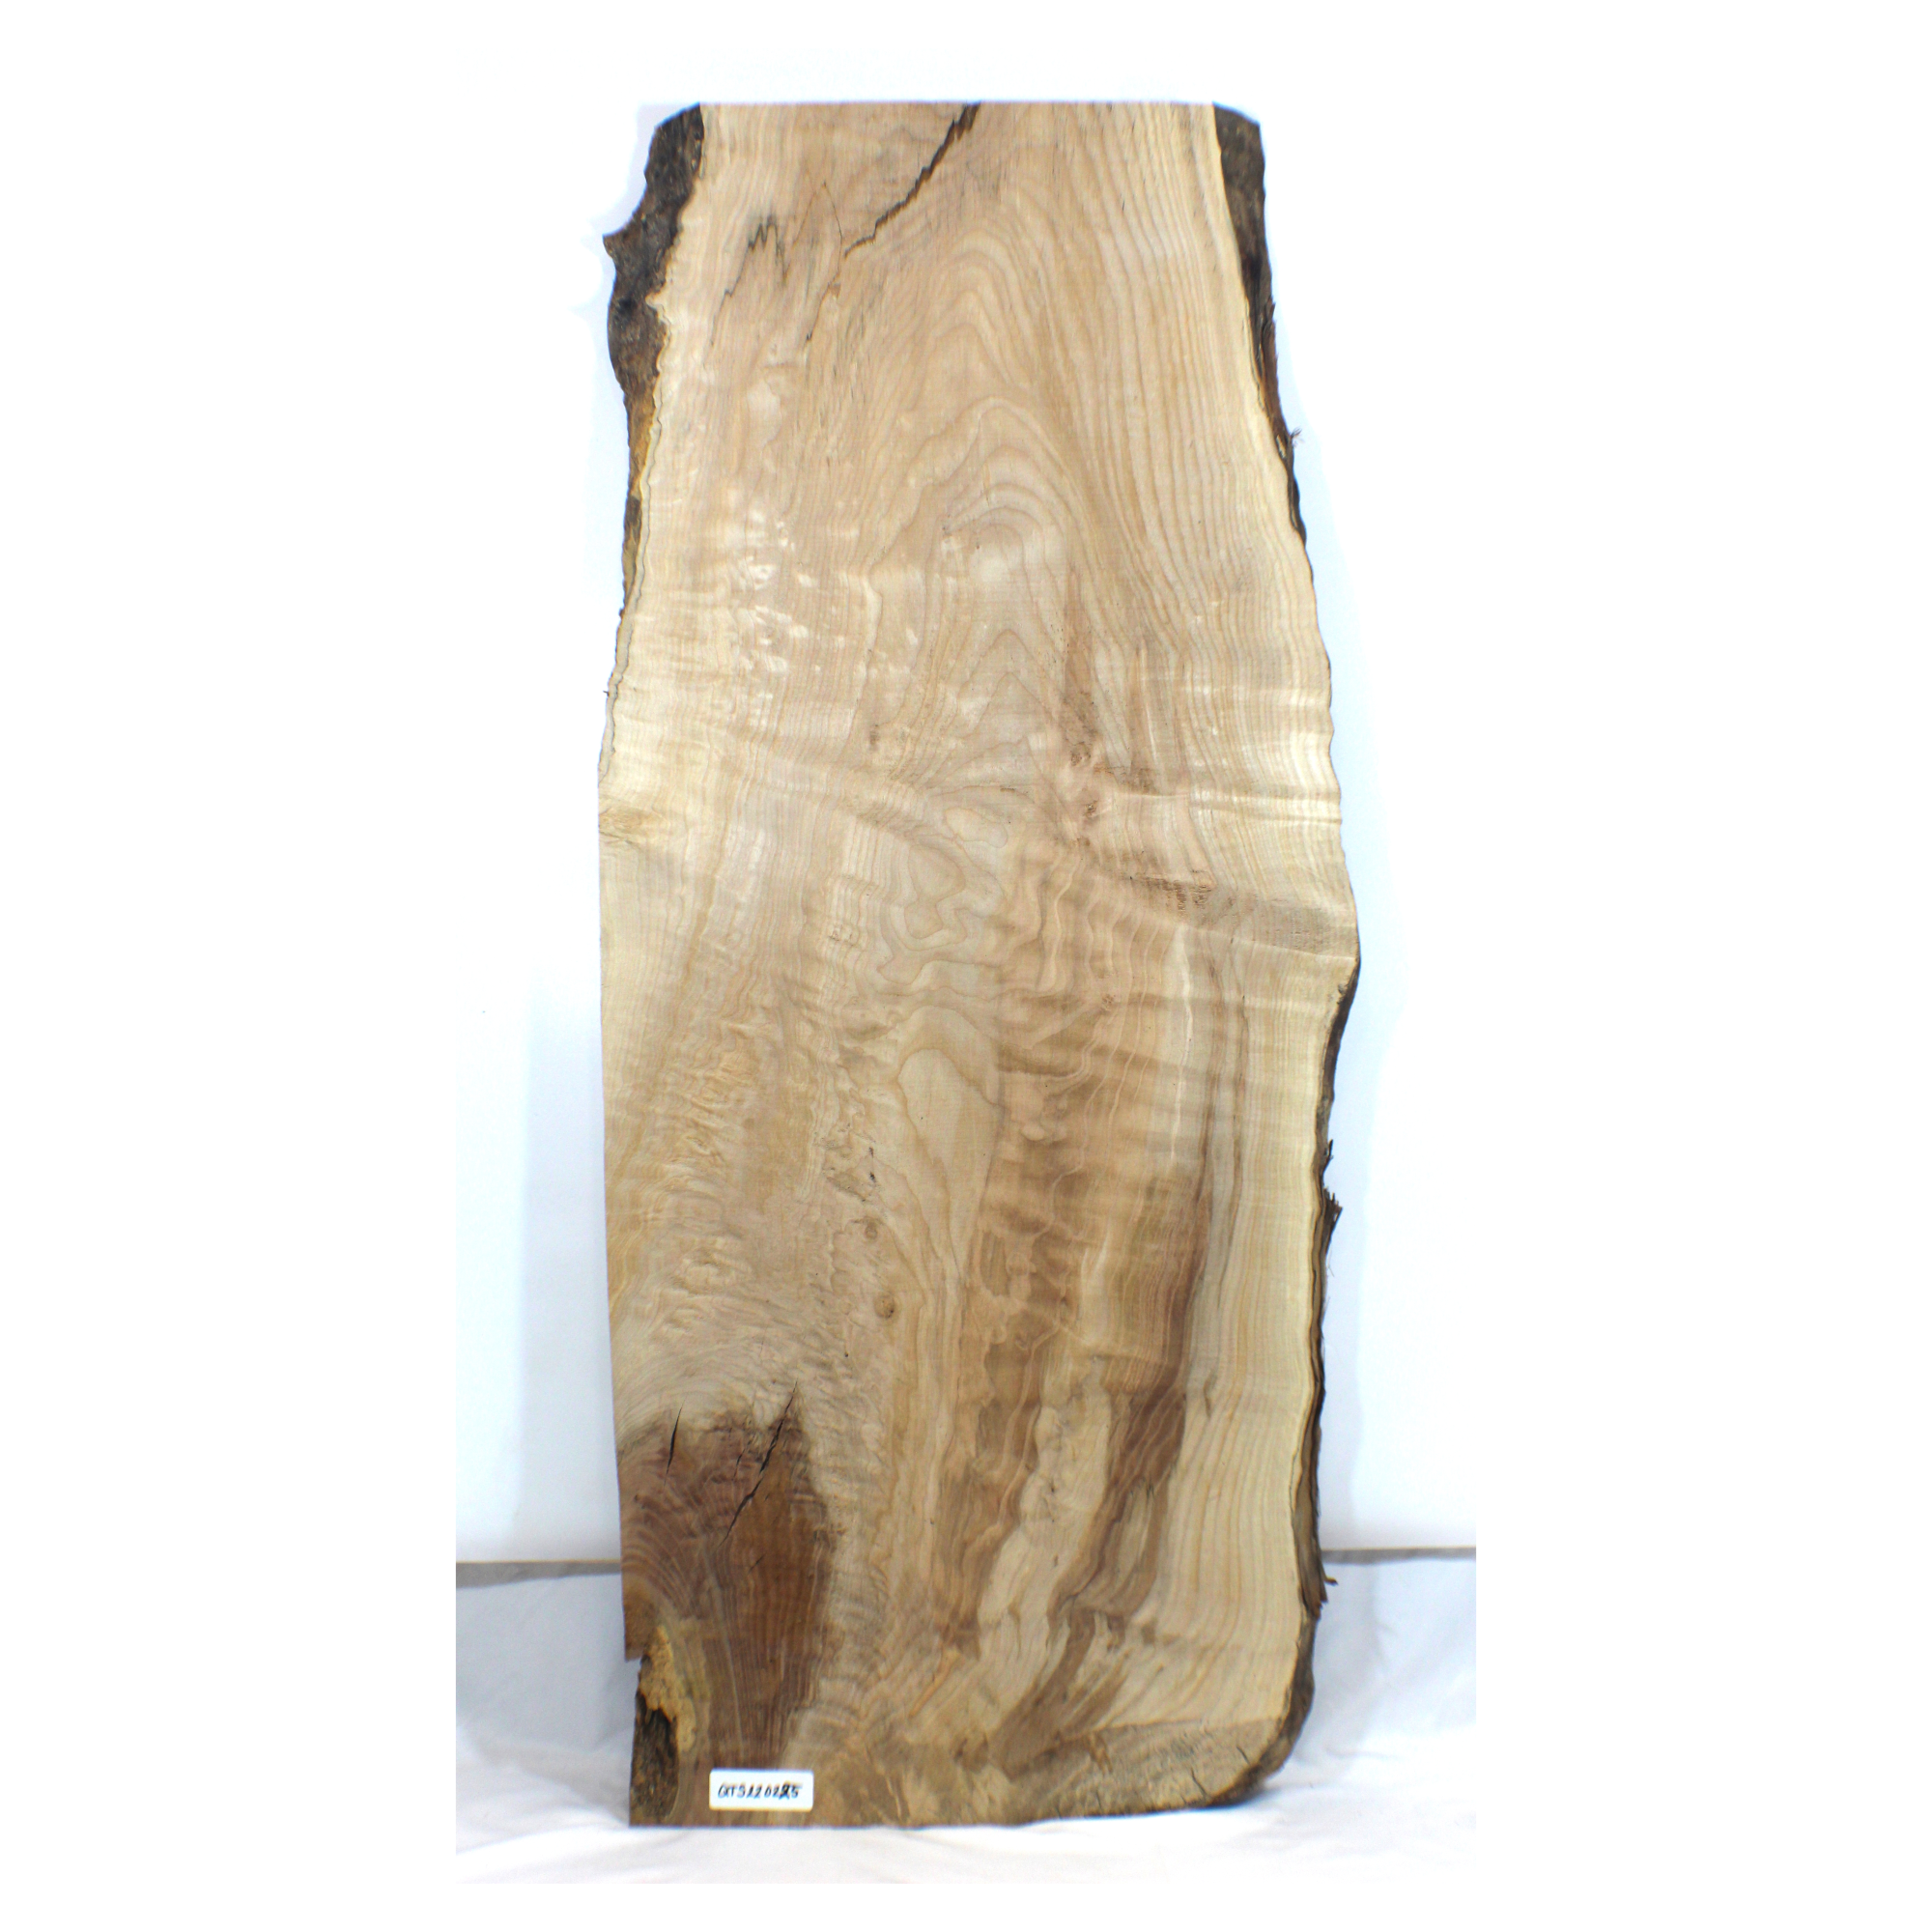 Quilted maple table slab with nice figure, beautiful color streak, and live edge. Dimensions: Thickness: 1.25